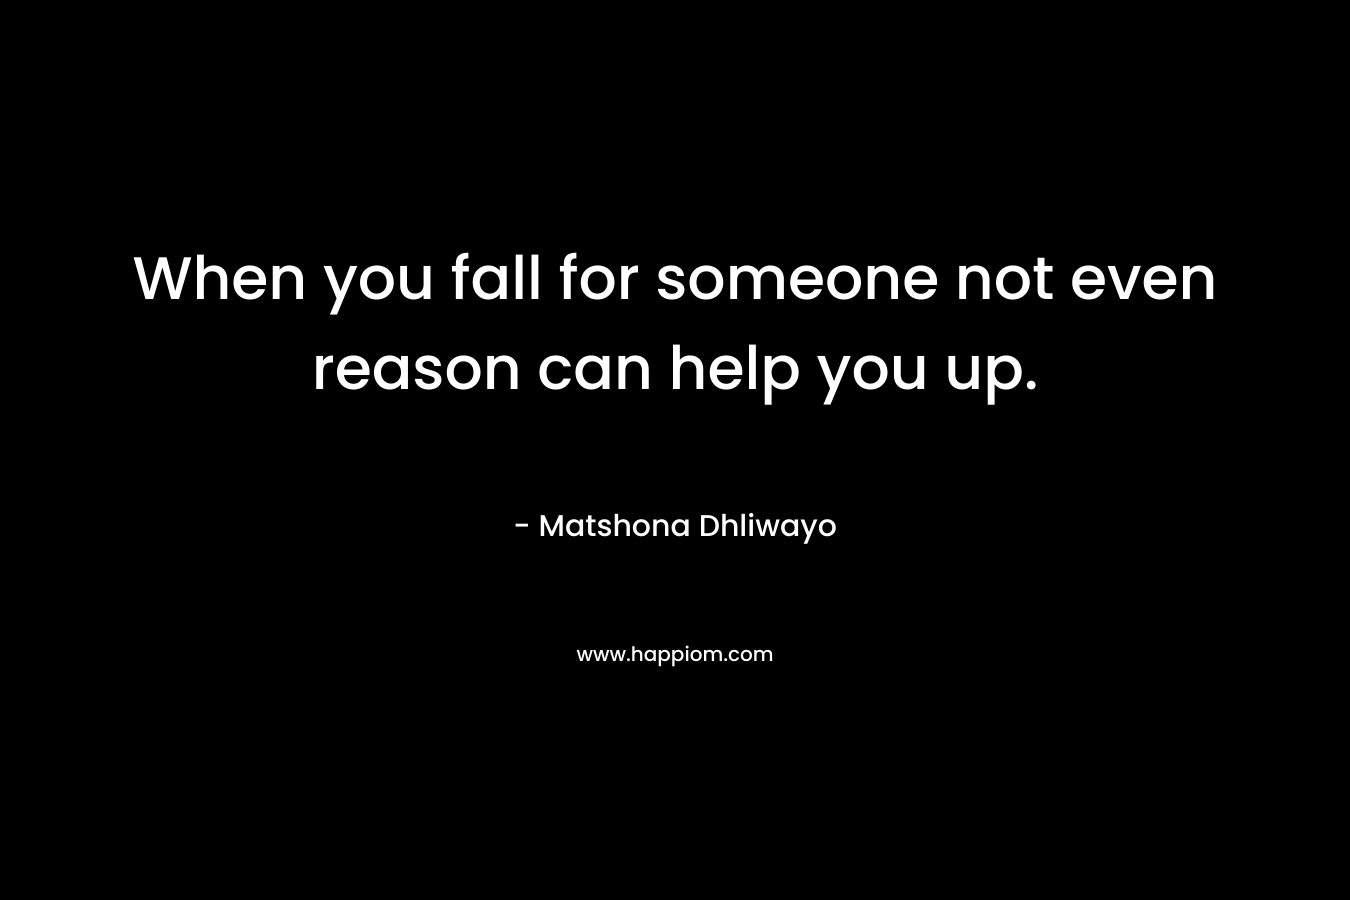 When you fall for someone not even reason can help you up.